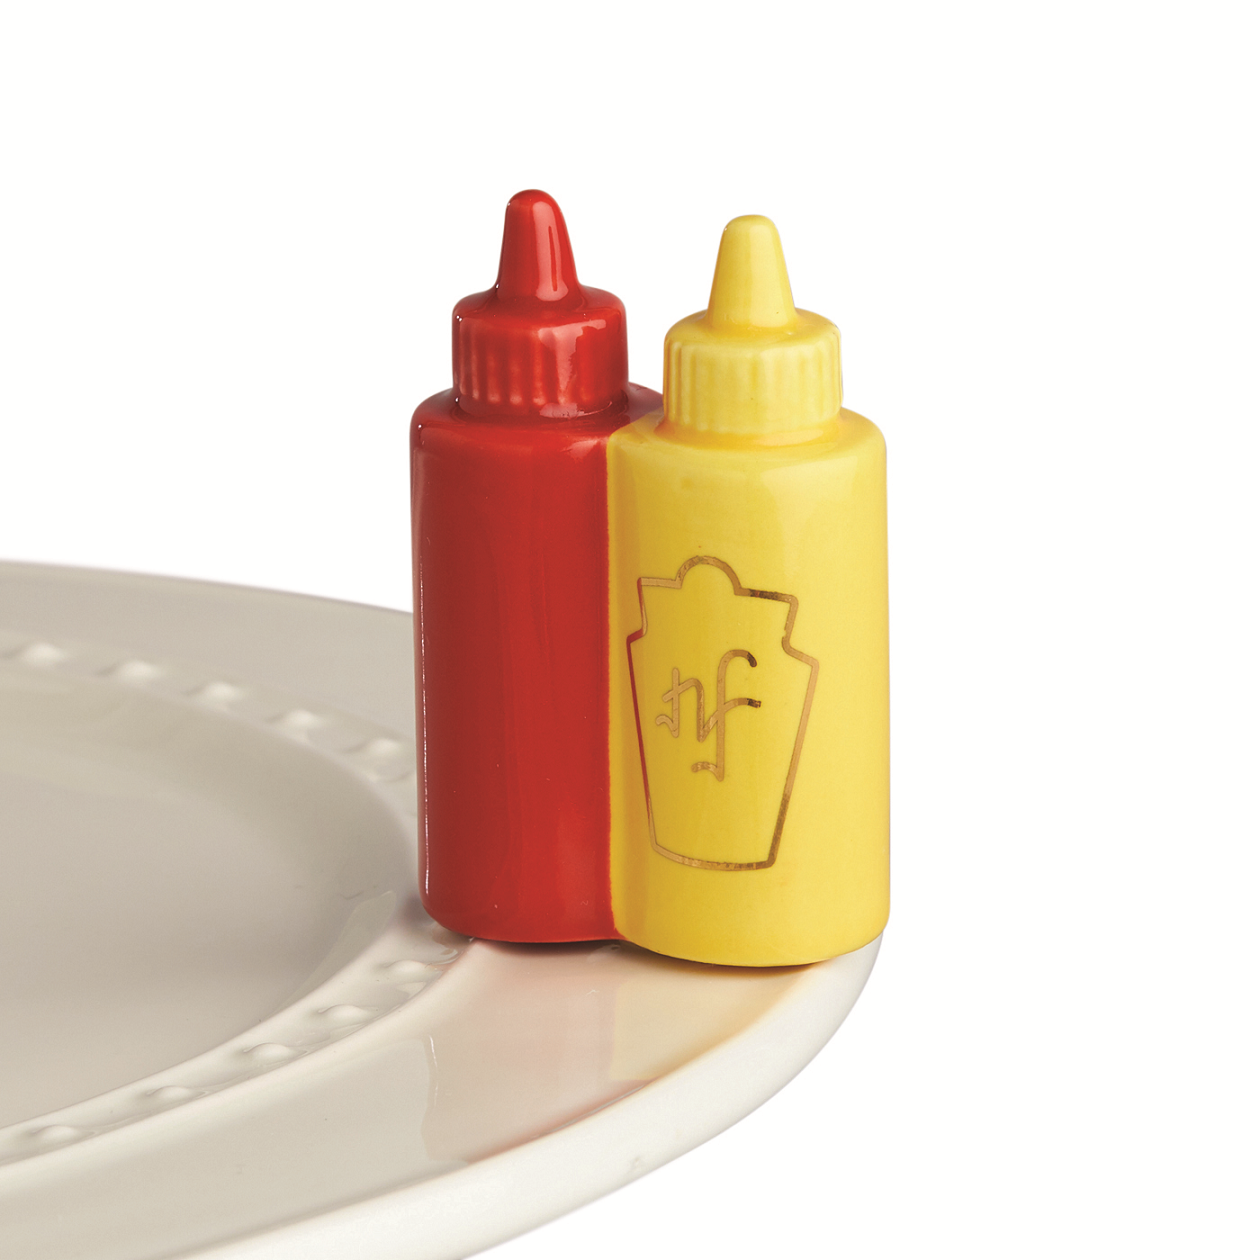 Main Squeeze - Ketchup & Mustard Mini from Nora Fleming.